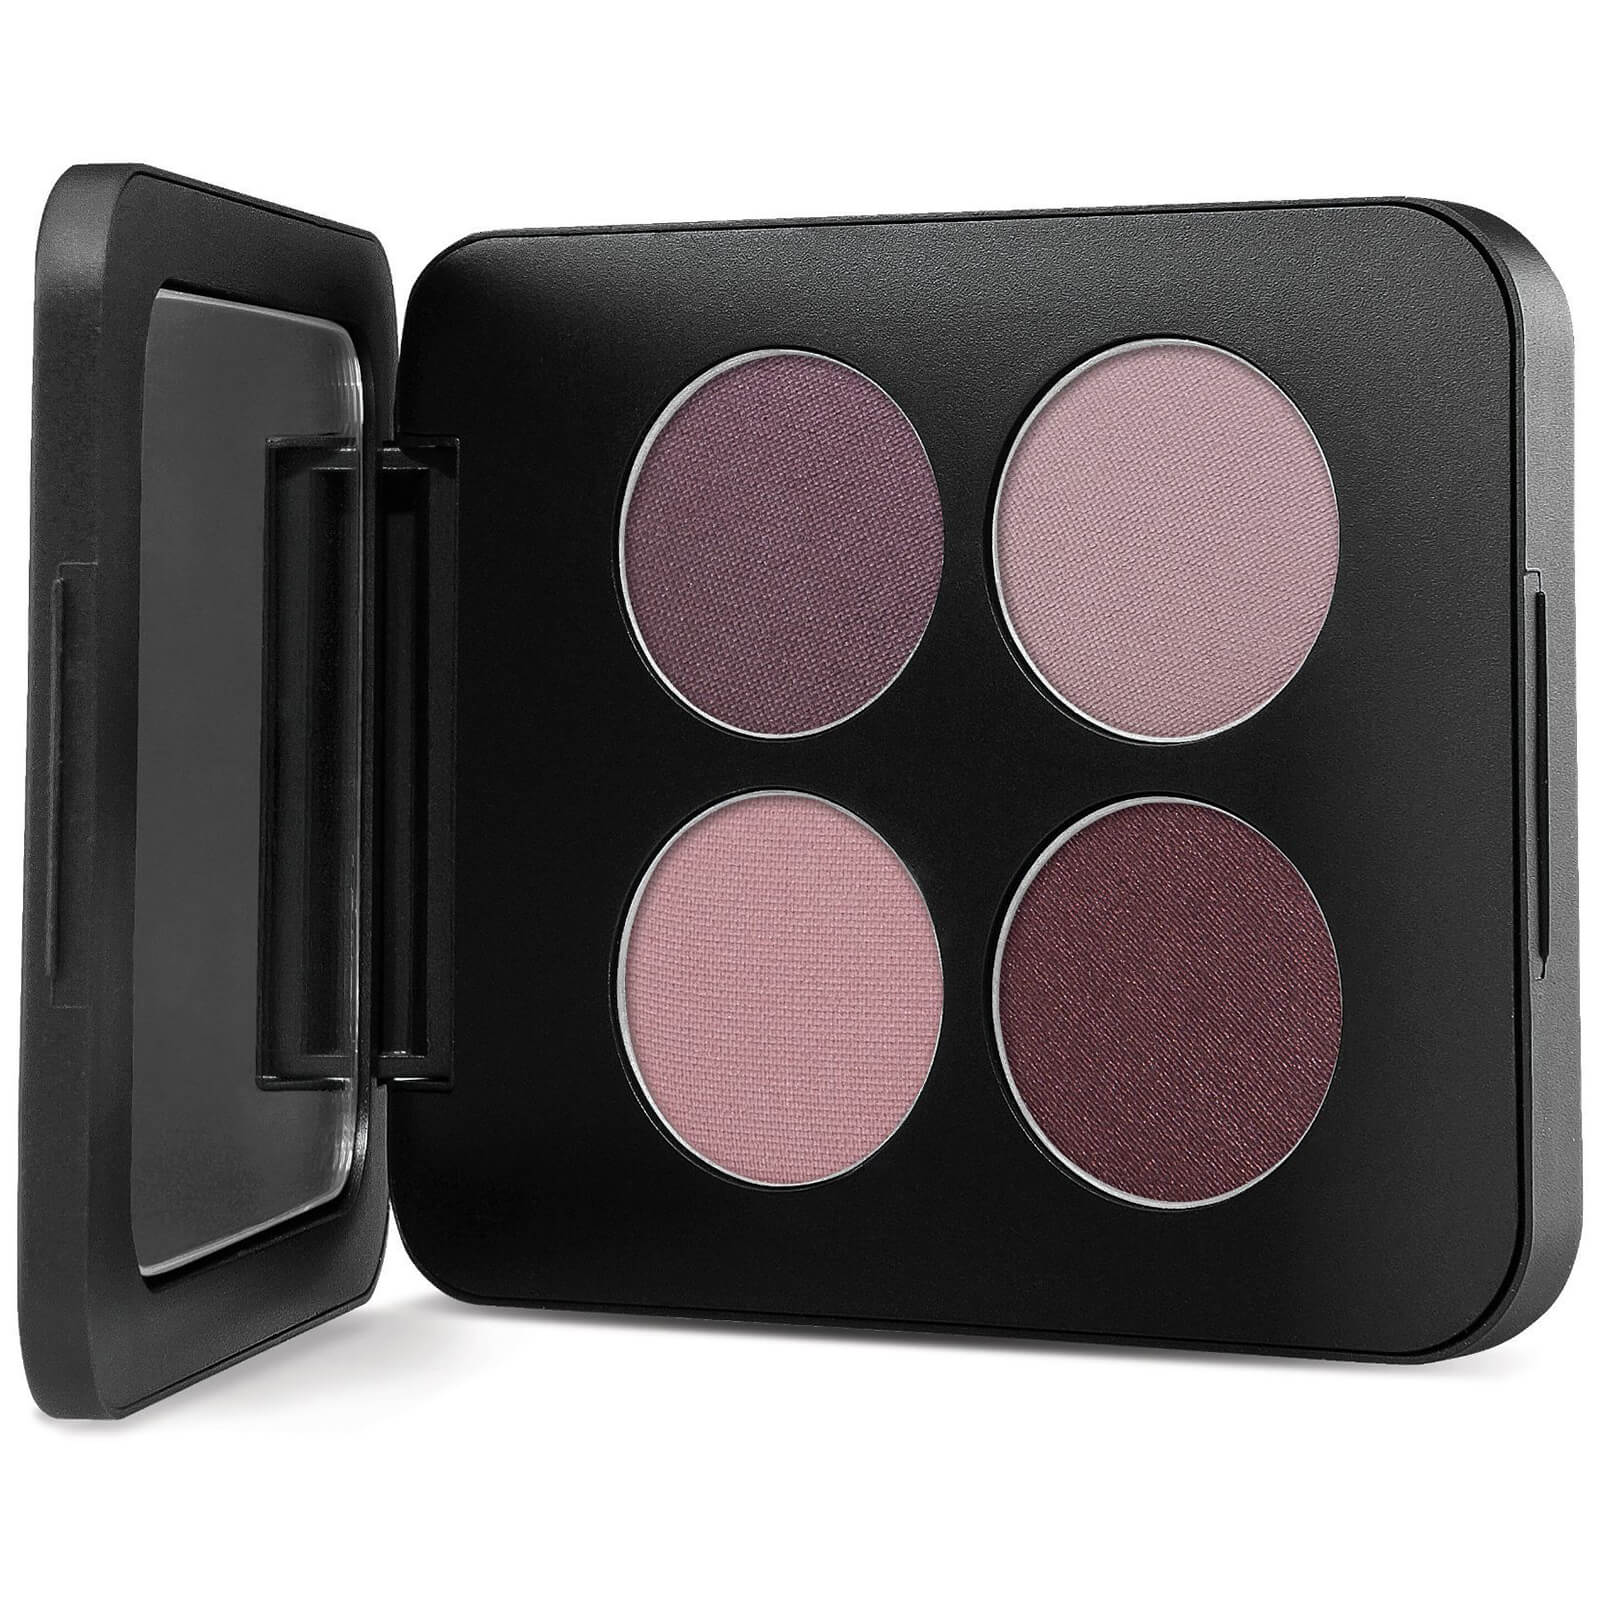 Youngblood Mineral Cosmetics Youngblood Pressed Mineral Eyeshadow Quad 4g (Various Shades) - Vintage